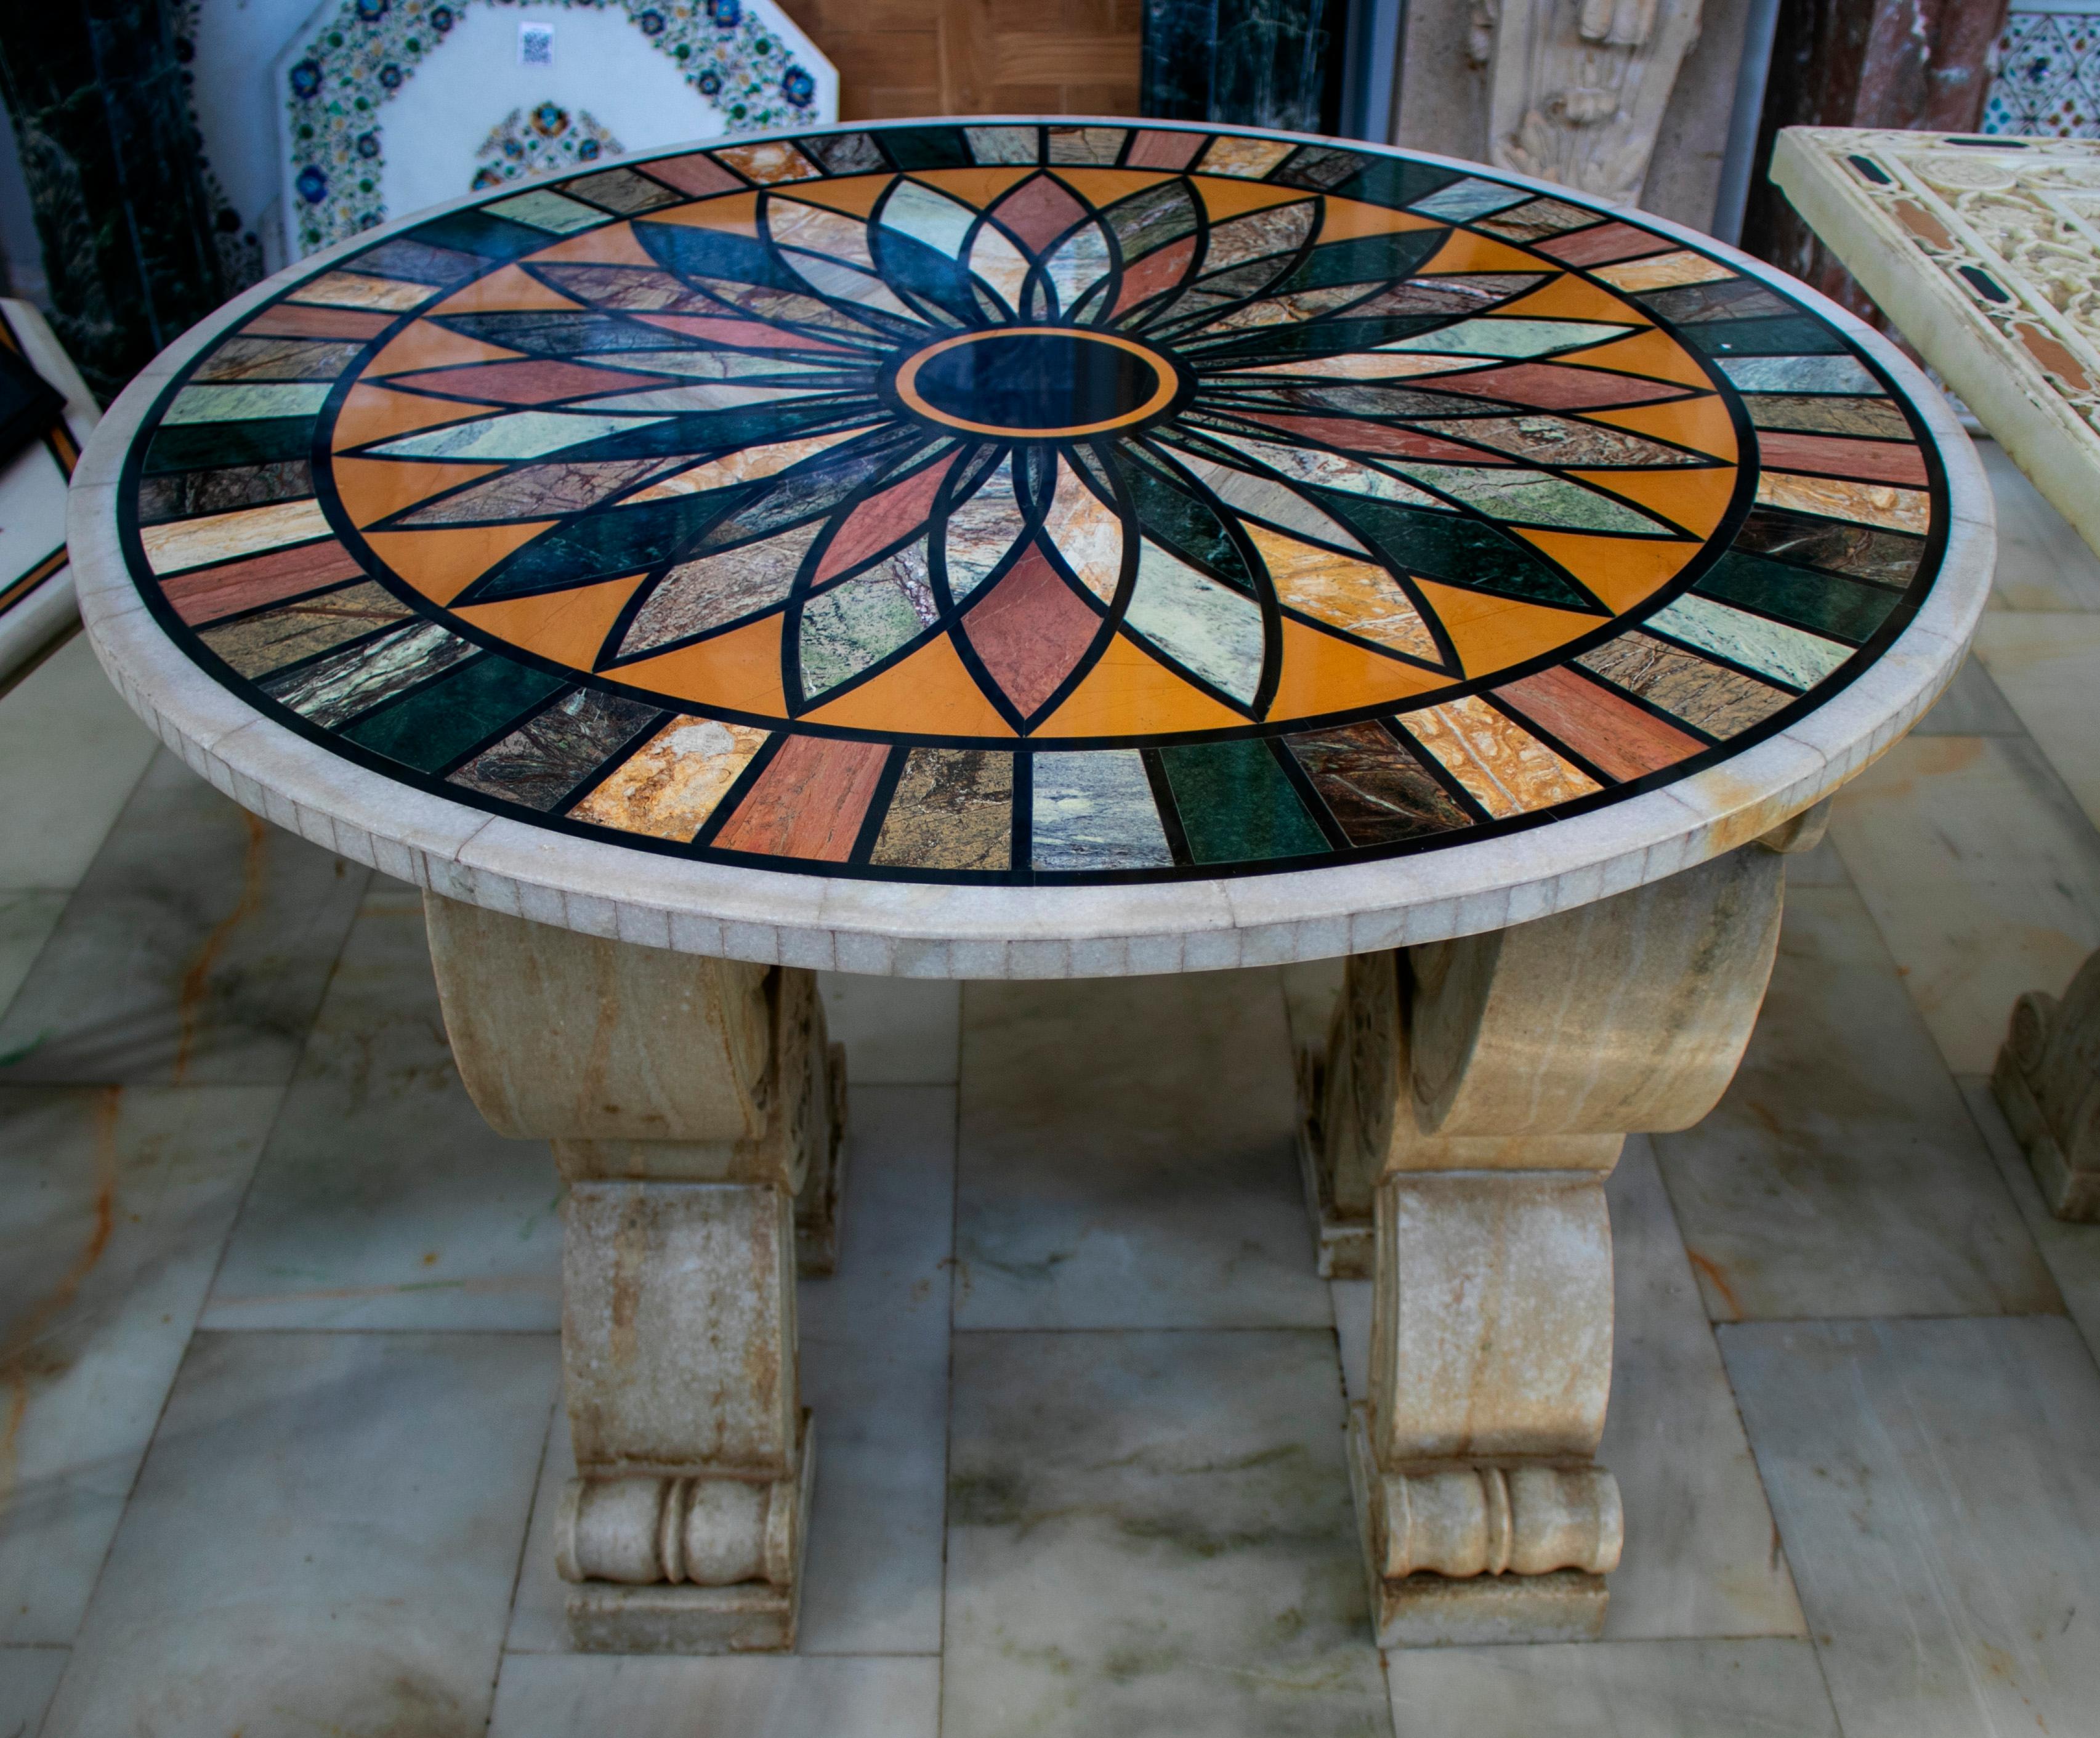 Round Italian geometric pietre dure technique handmade mosaic table top with different marble and semiprecious stones.
 